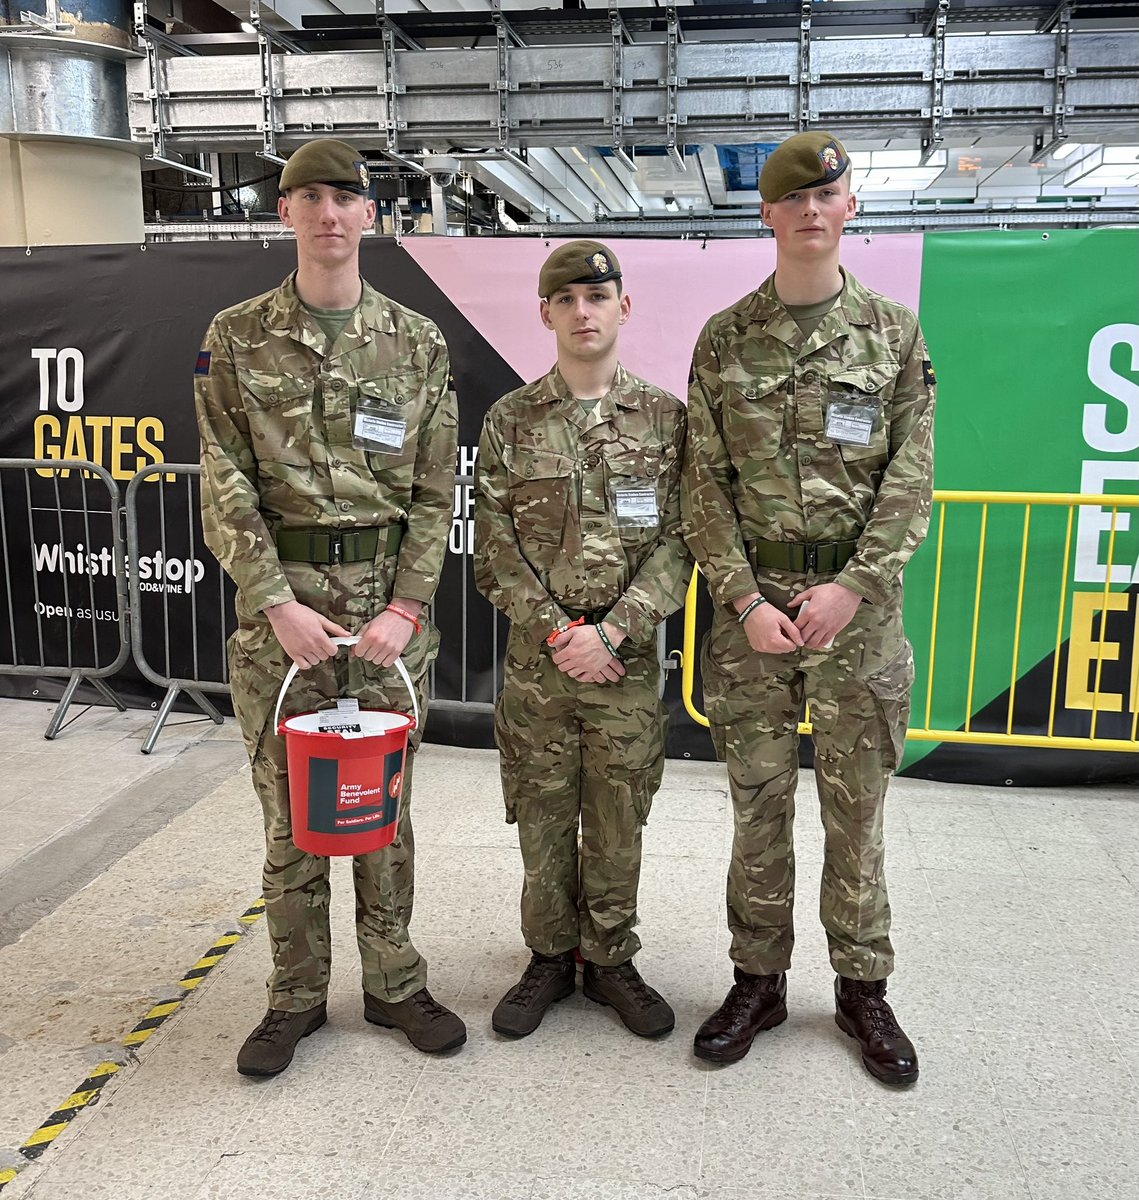 We are here today with Soldiers from Nijmegen Company @GrenadierGds collecting at @NetworkRailVIC station raising funds for the @ArmyBenFund A big thank you to the soldiers for their hard work and support. If you are passing please come and say hello. #ForSoldiersForLife